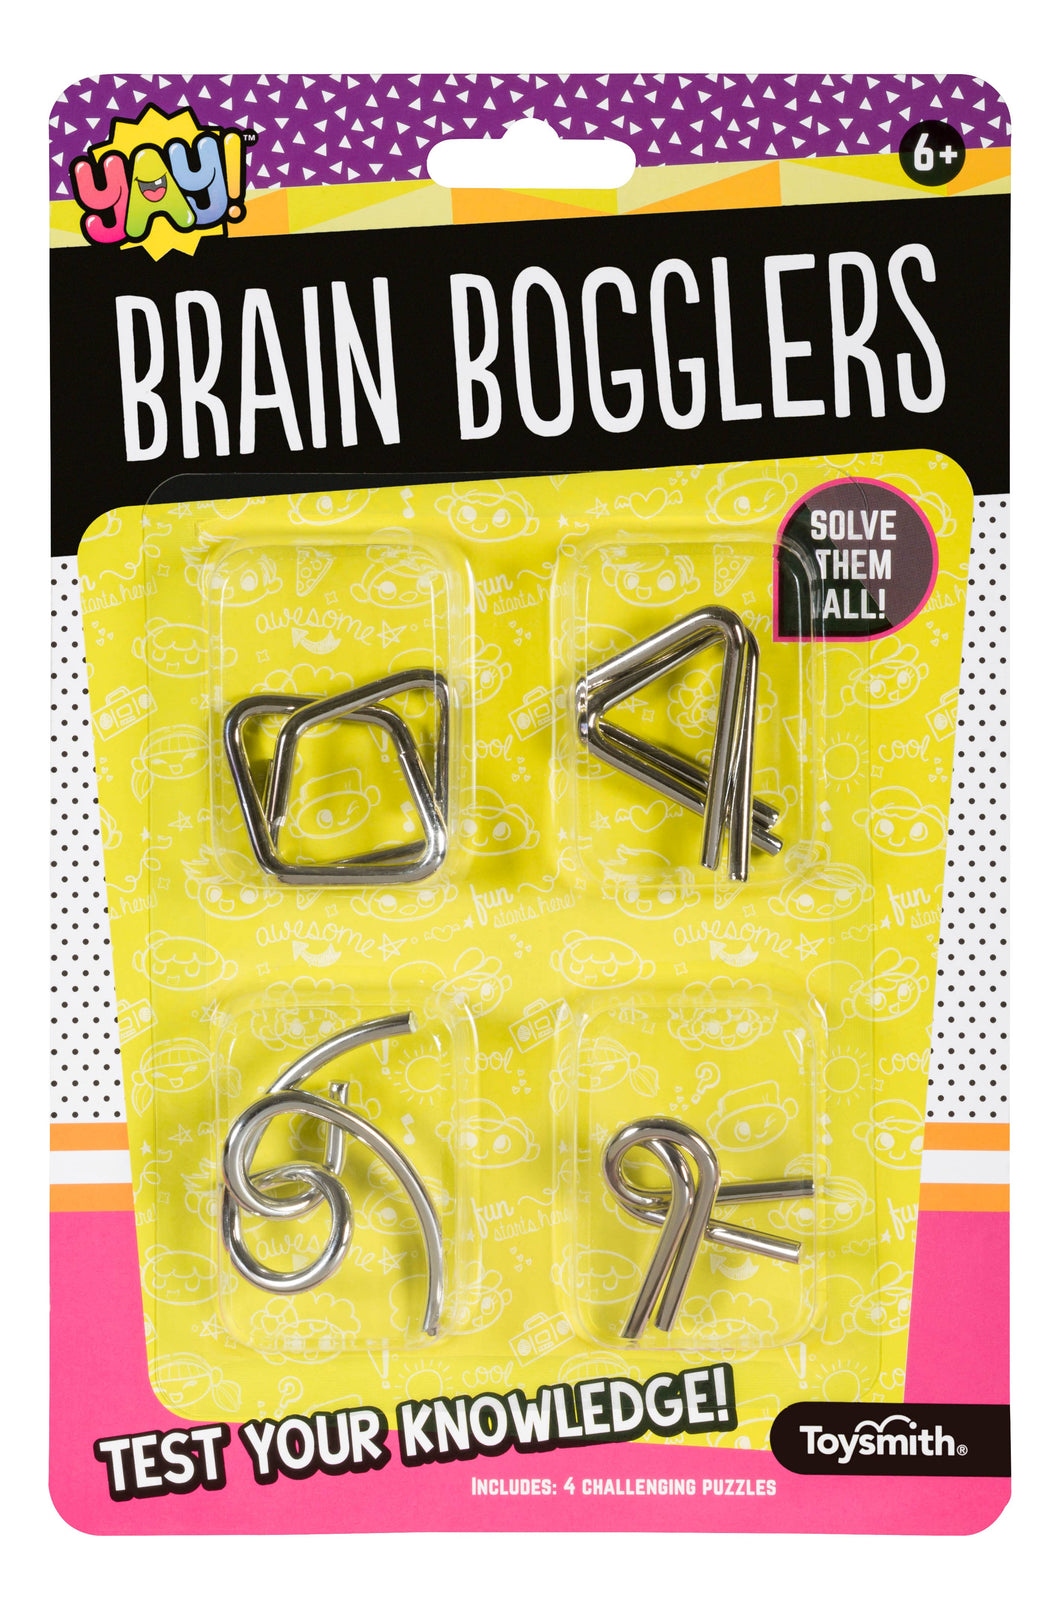 Yay! Brain Bogglers, Four Challenging Puzzles, Fun Size